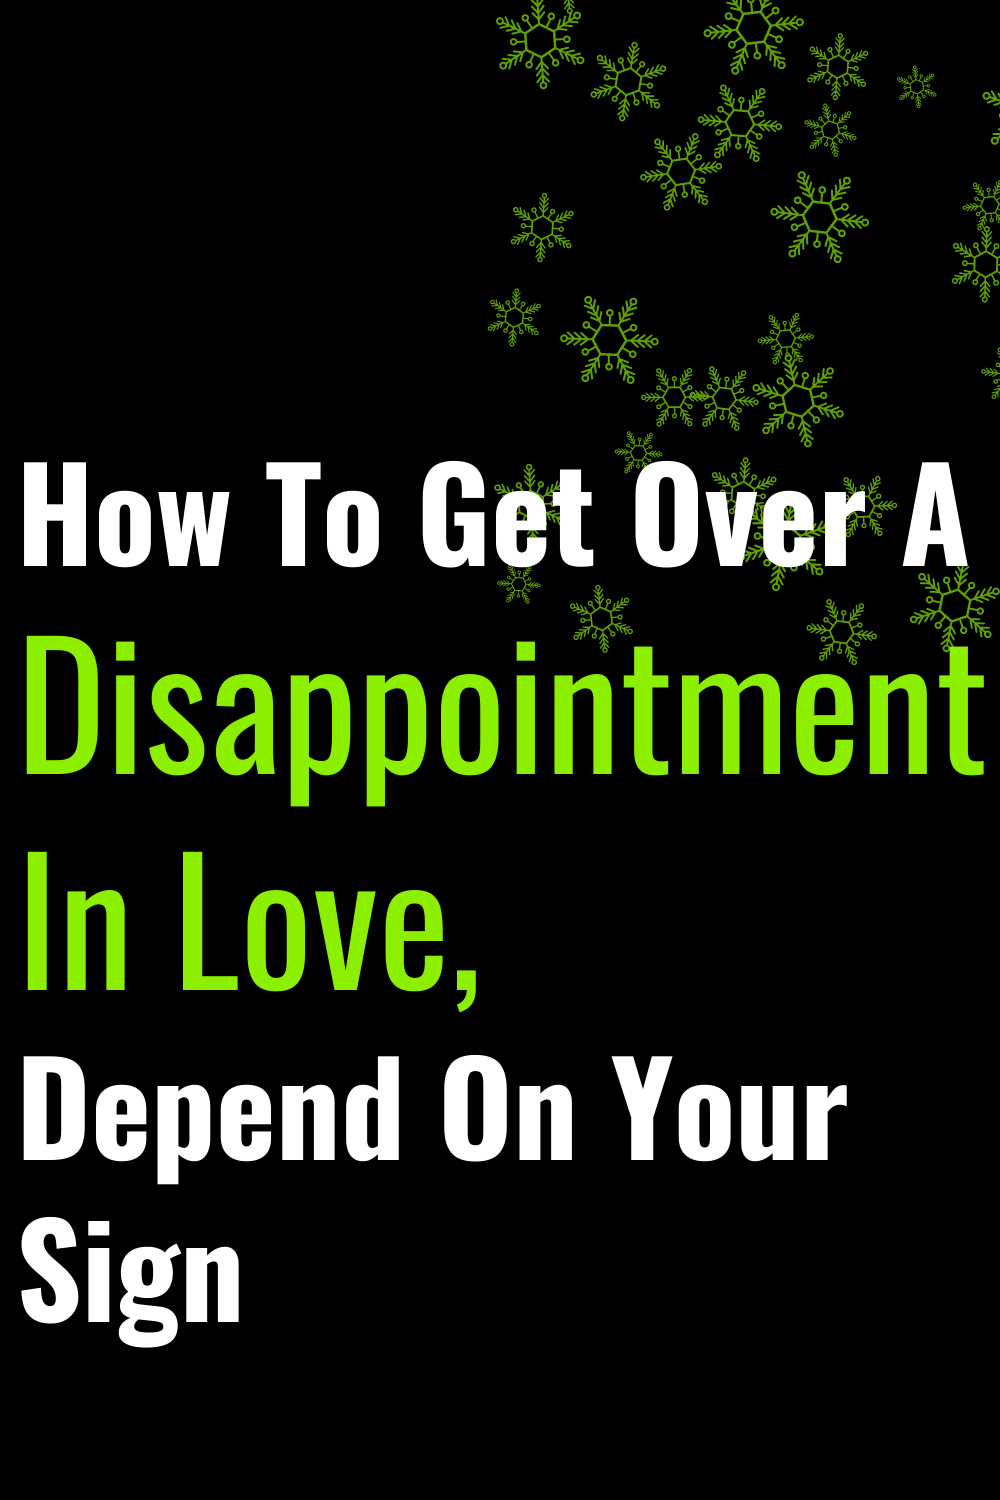 How To Get Over A Disappointment In Love, Depend On Your Sign